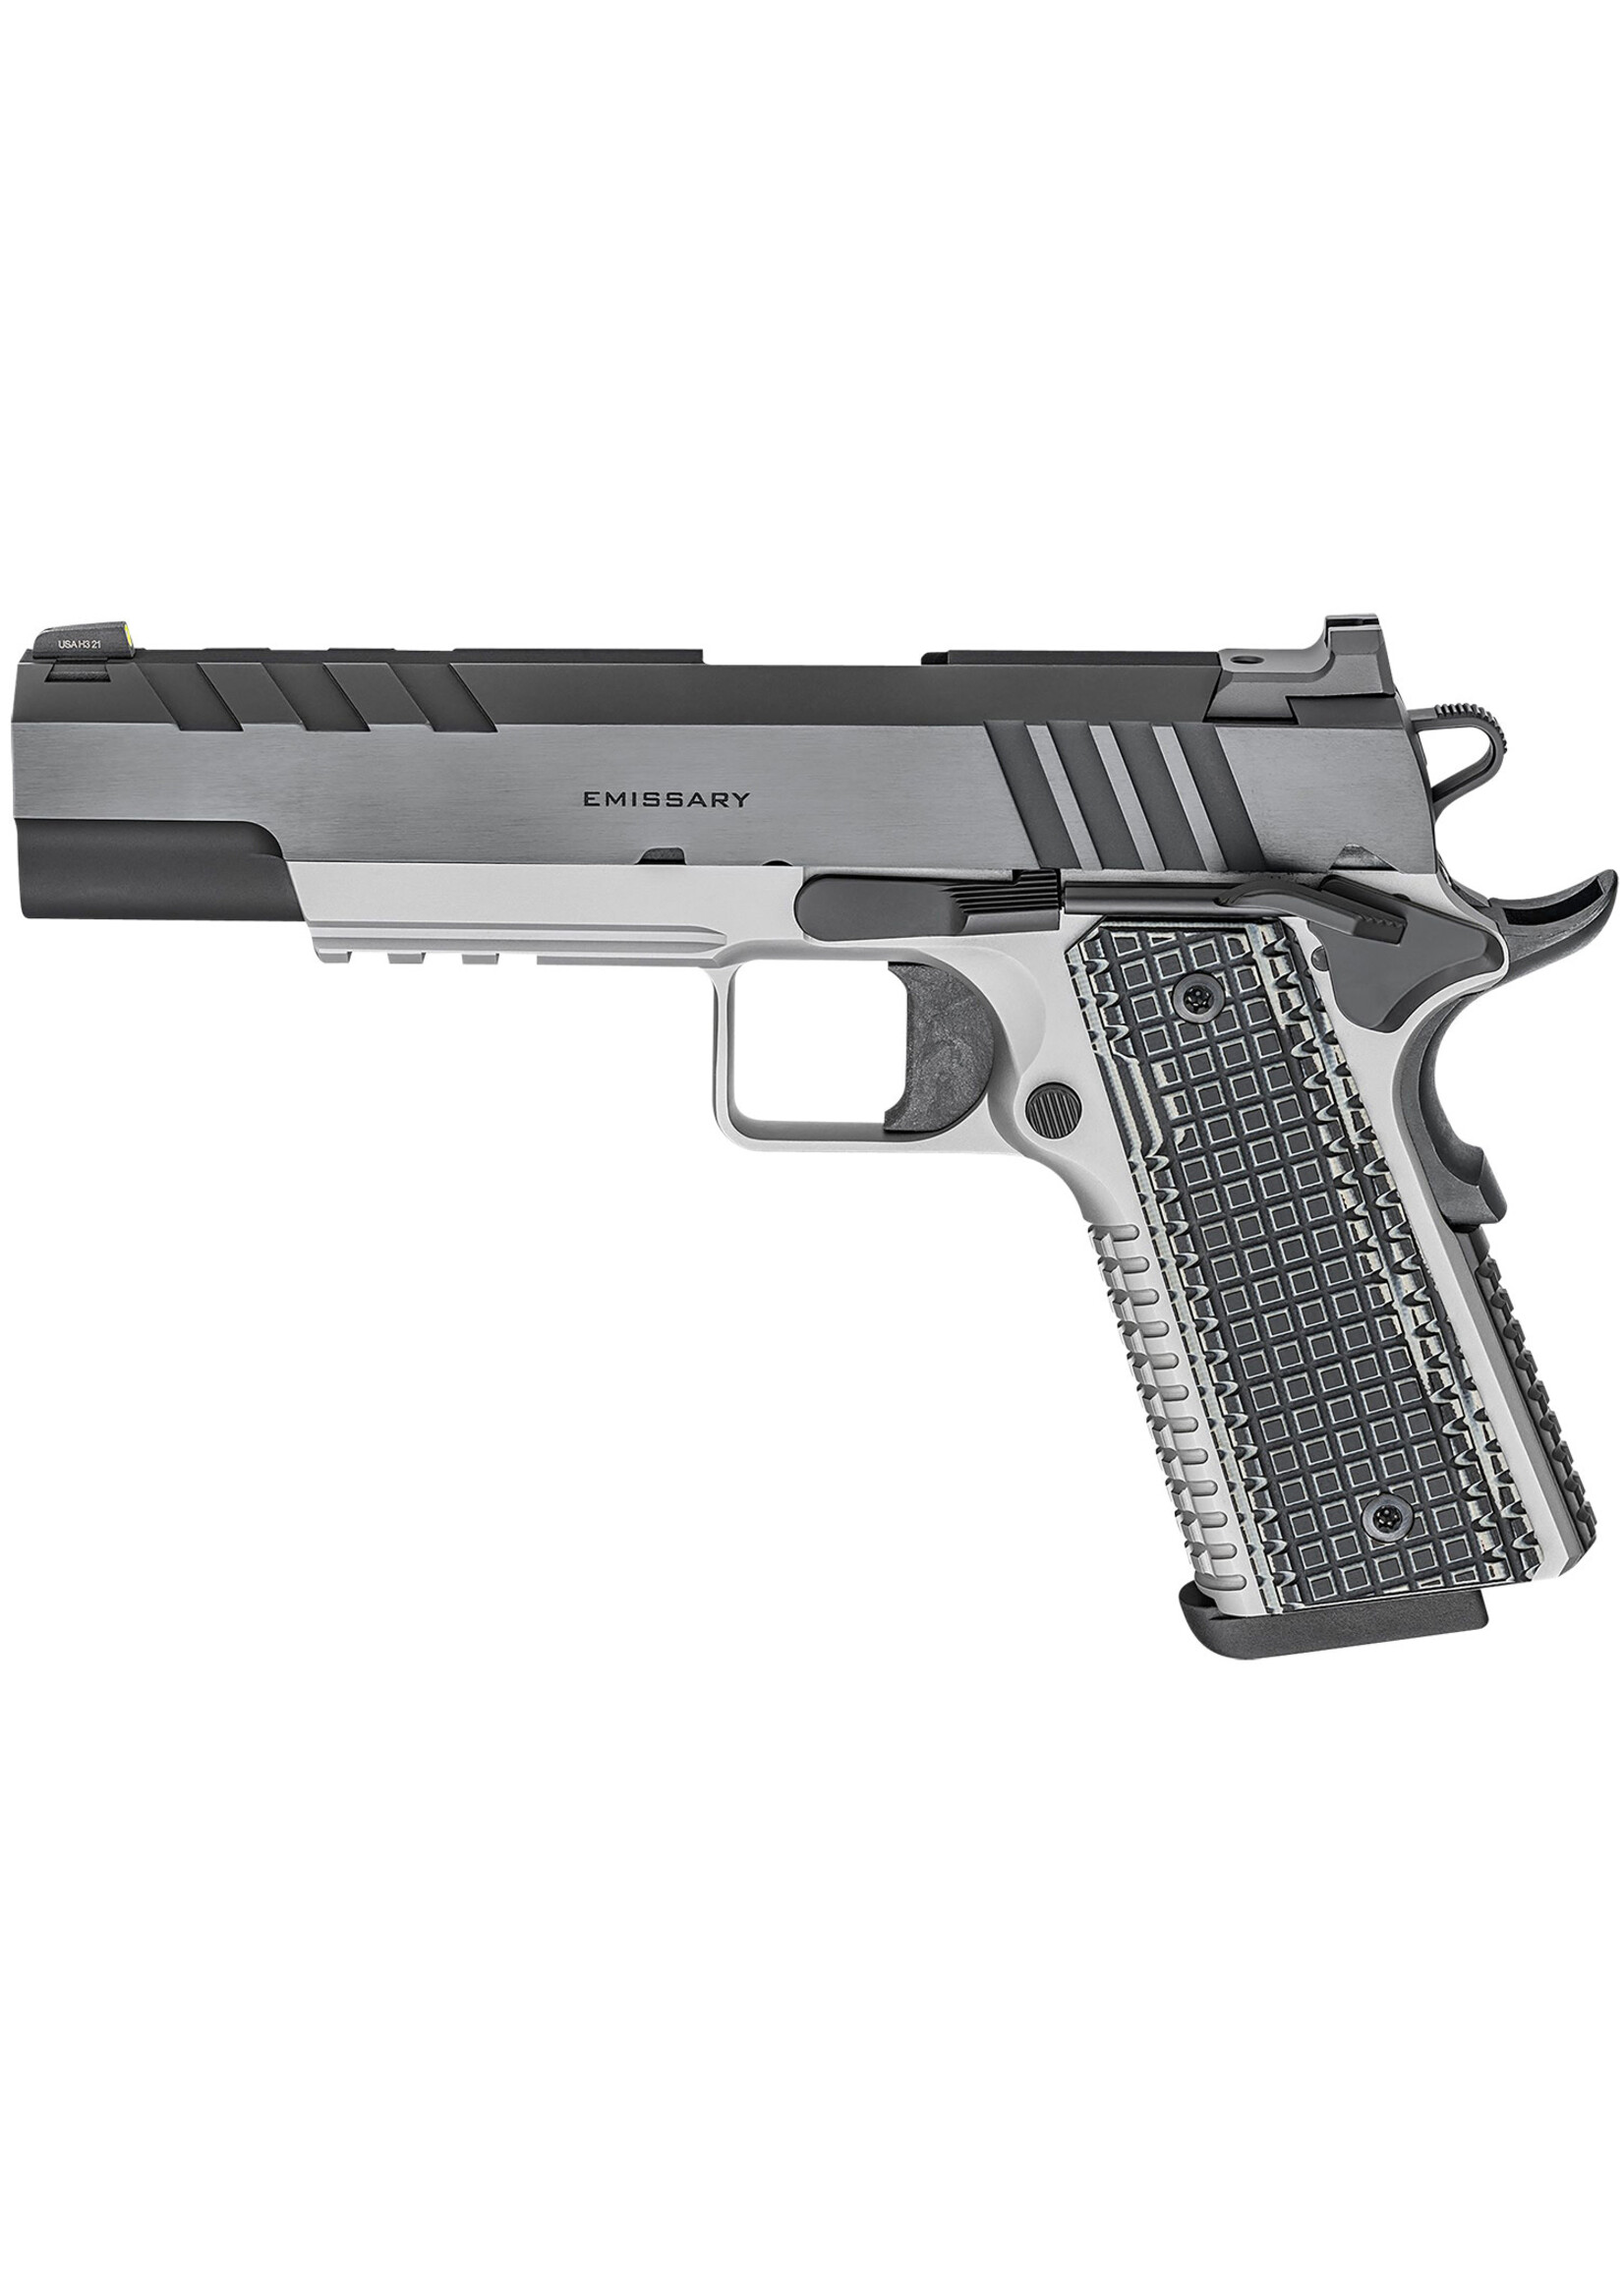 Springfield Armory Springfield Armory PX9219L 1911 Emissary 9mm Luger 9+1, 5" Stainless Match Grade Bull Steel Barrel, Blued/Stainless Serrated/Tri-Top Cut Steel Slide, Stainless Steel Frame w/Beavertail & Picatinny Rail, Black VZ Thin-Line G10 Grip, Right Hand